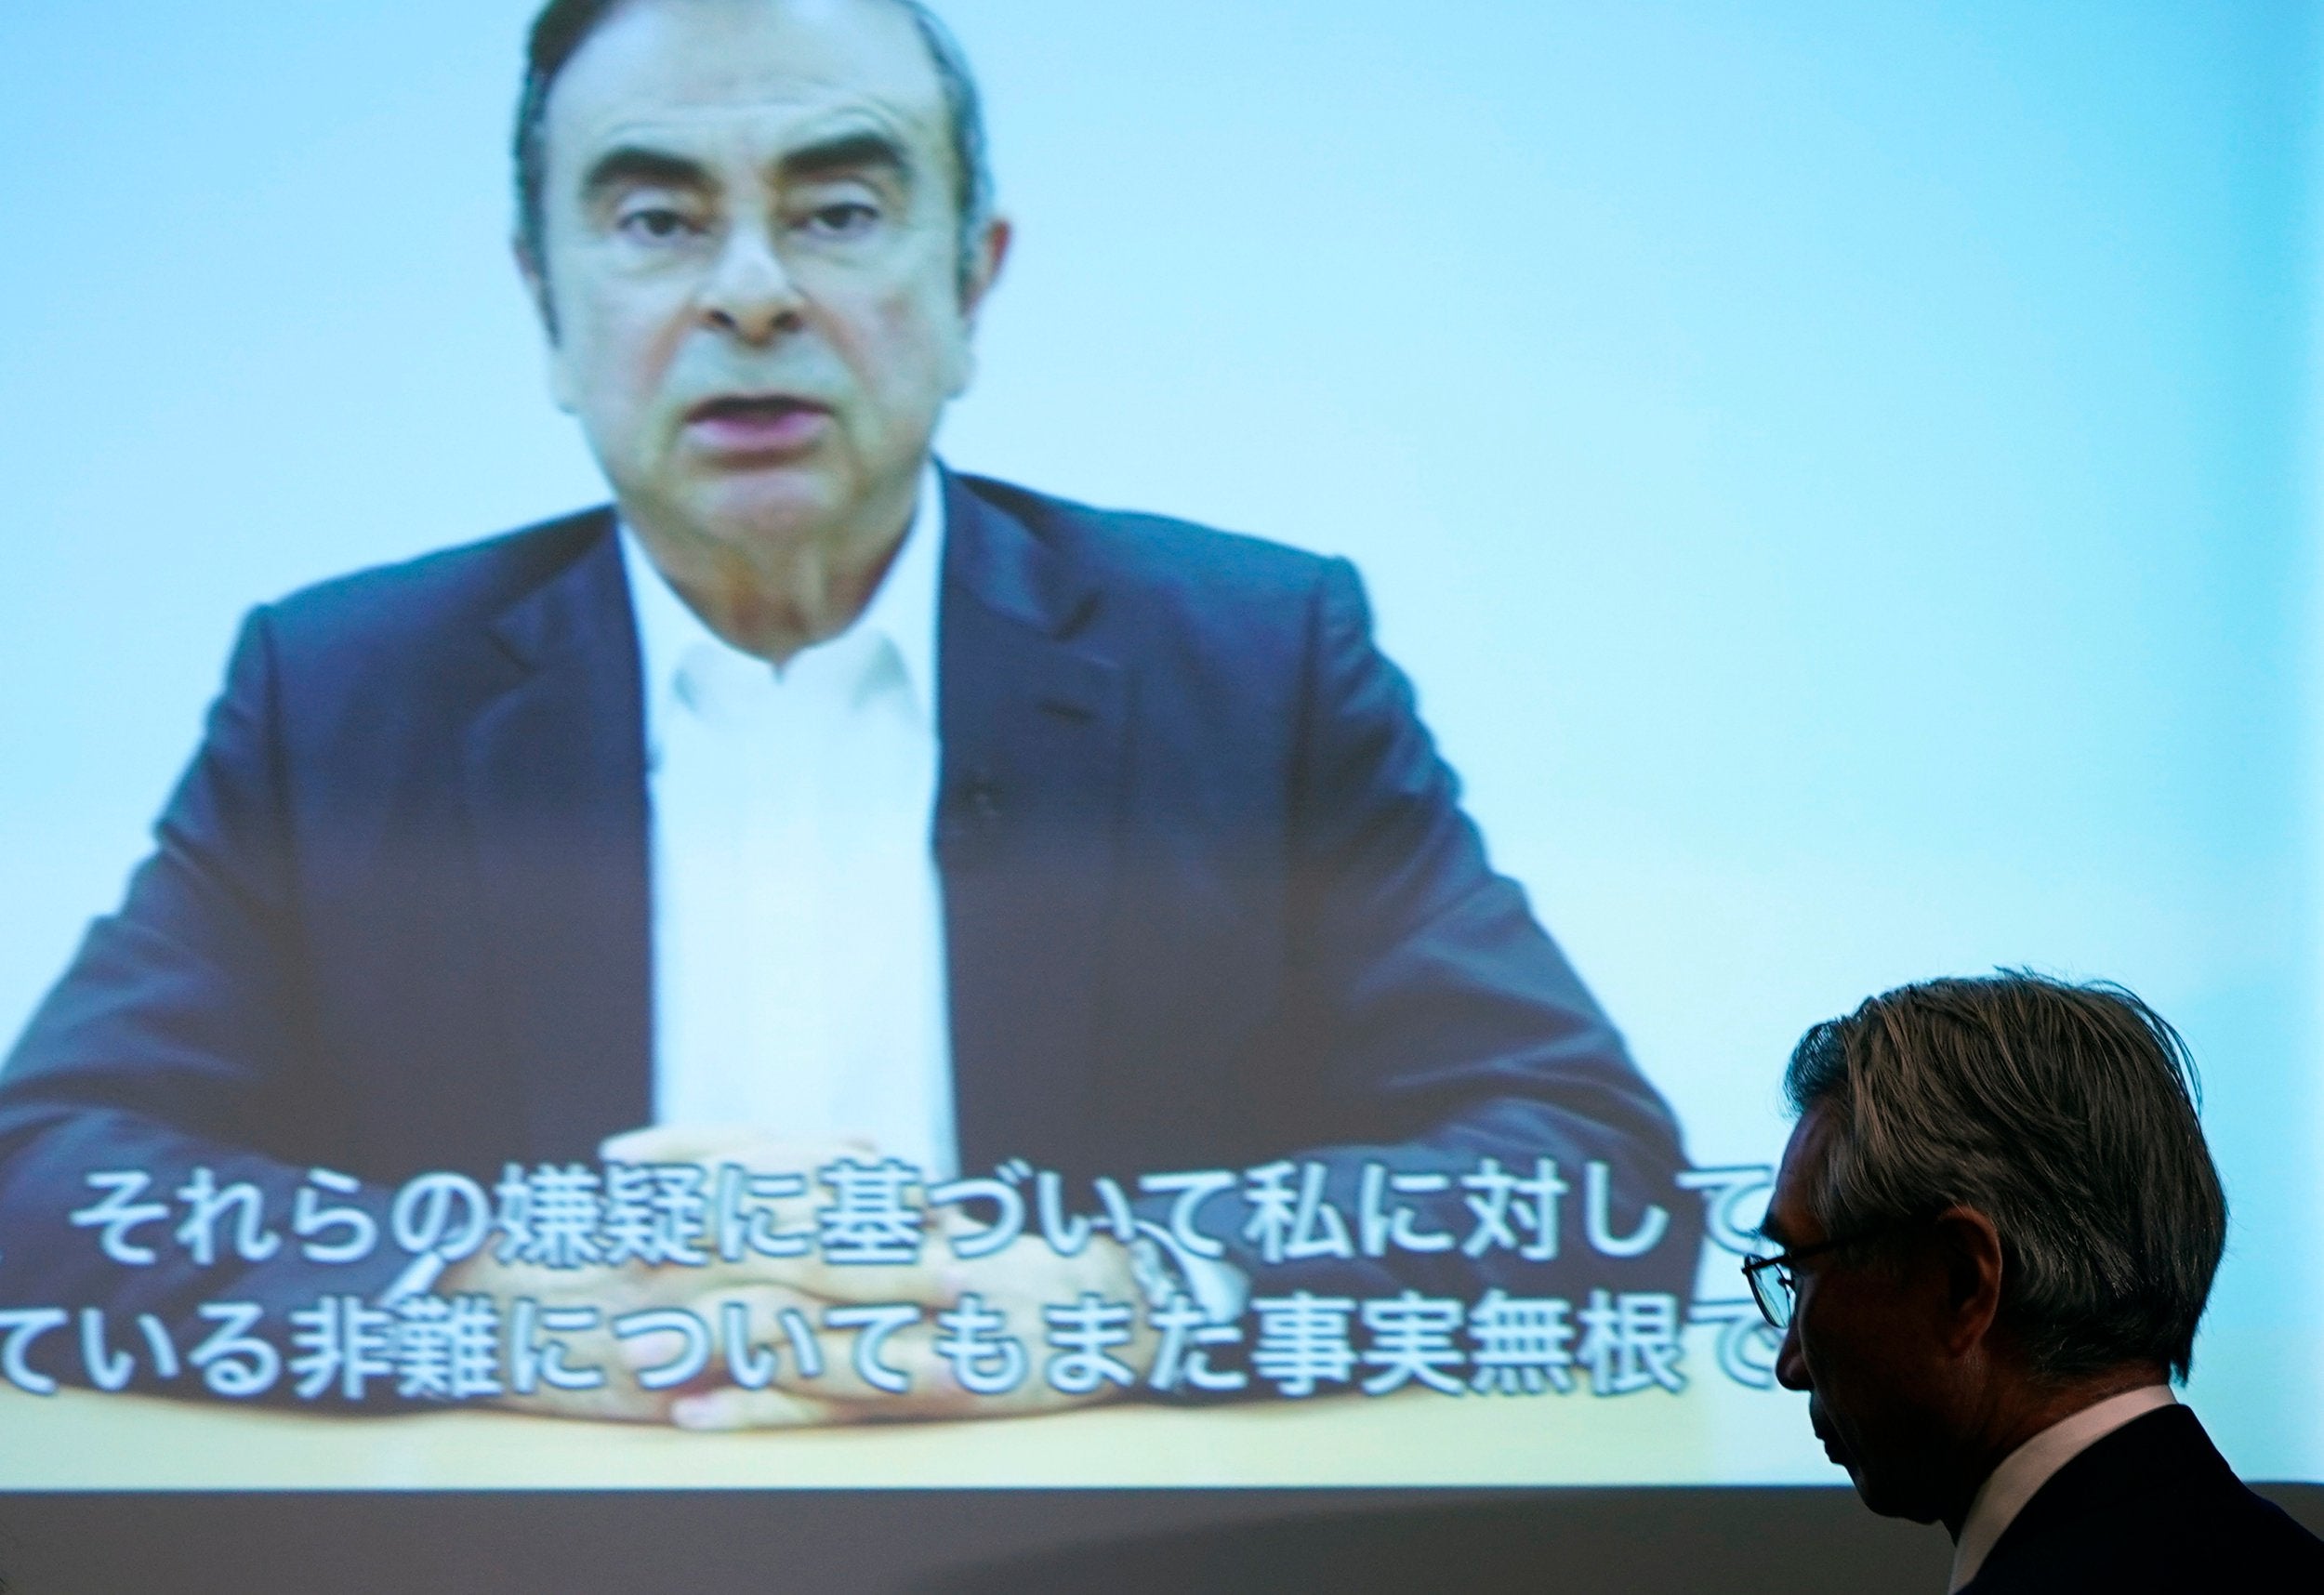 In an eight-minute video message released on Tuesday, the former Nissan chairman said that executives behind the conspiracy were motivated by “selfish fears”